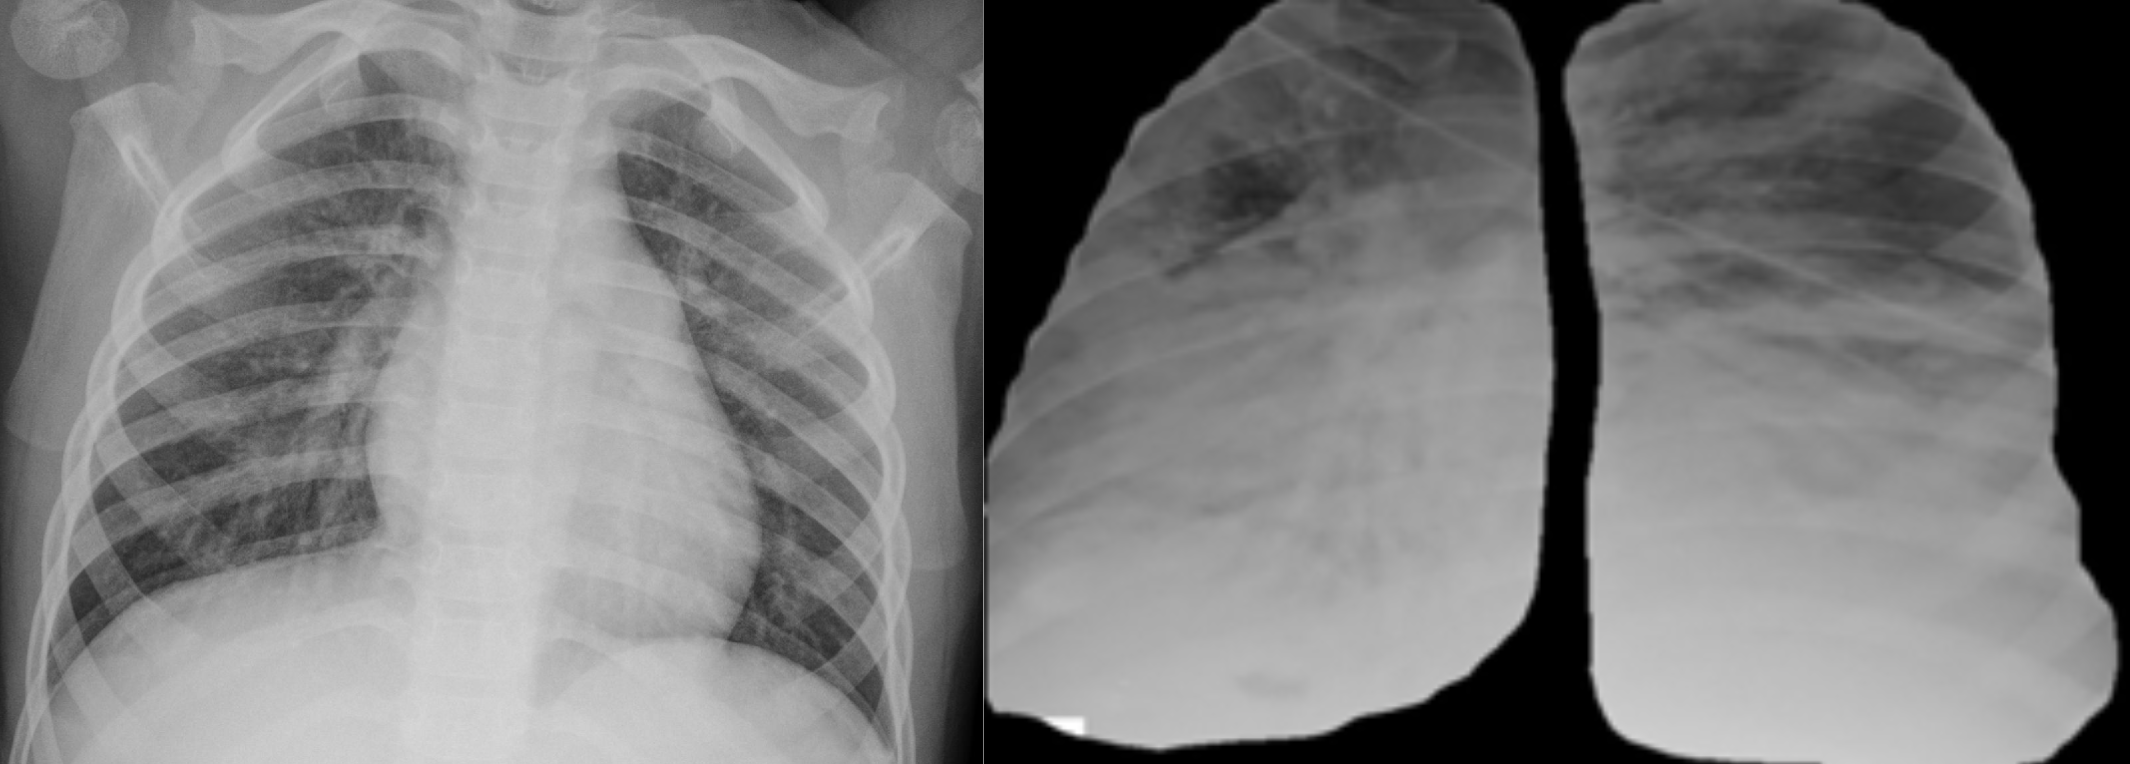 Left: Unlabeled chest X-ray with heart and other organs present. Right: Masked-normalized lungs, achievable thanks to the segmentation annotations. These can greatly improve the performance of classification.